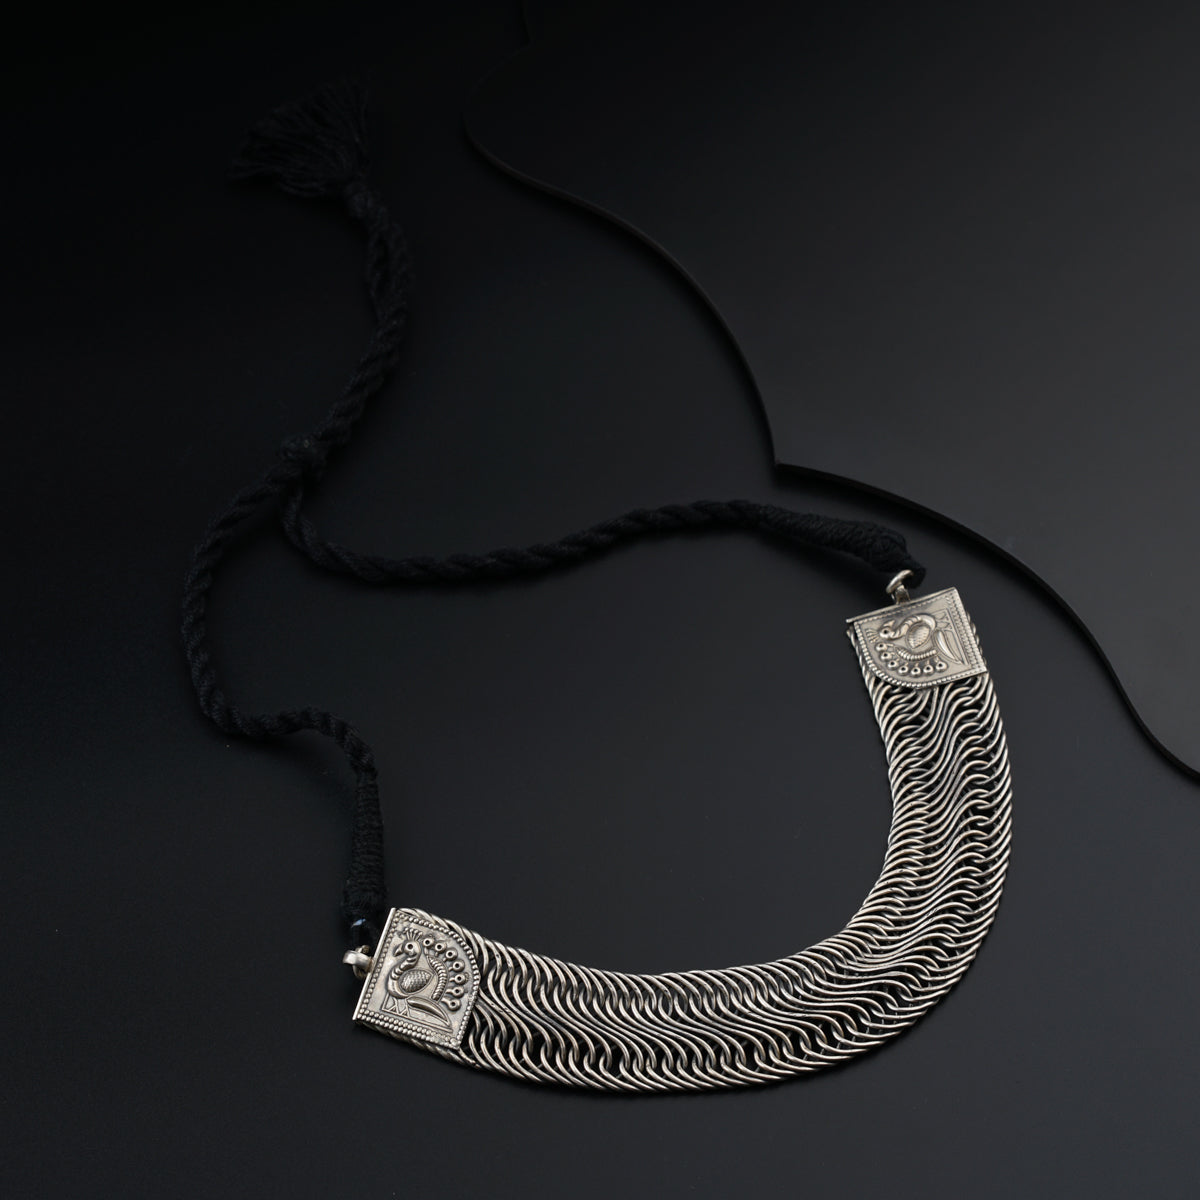 a silver necklace on a black background